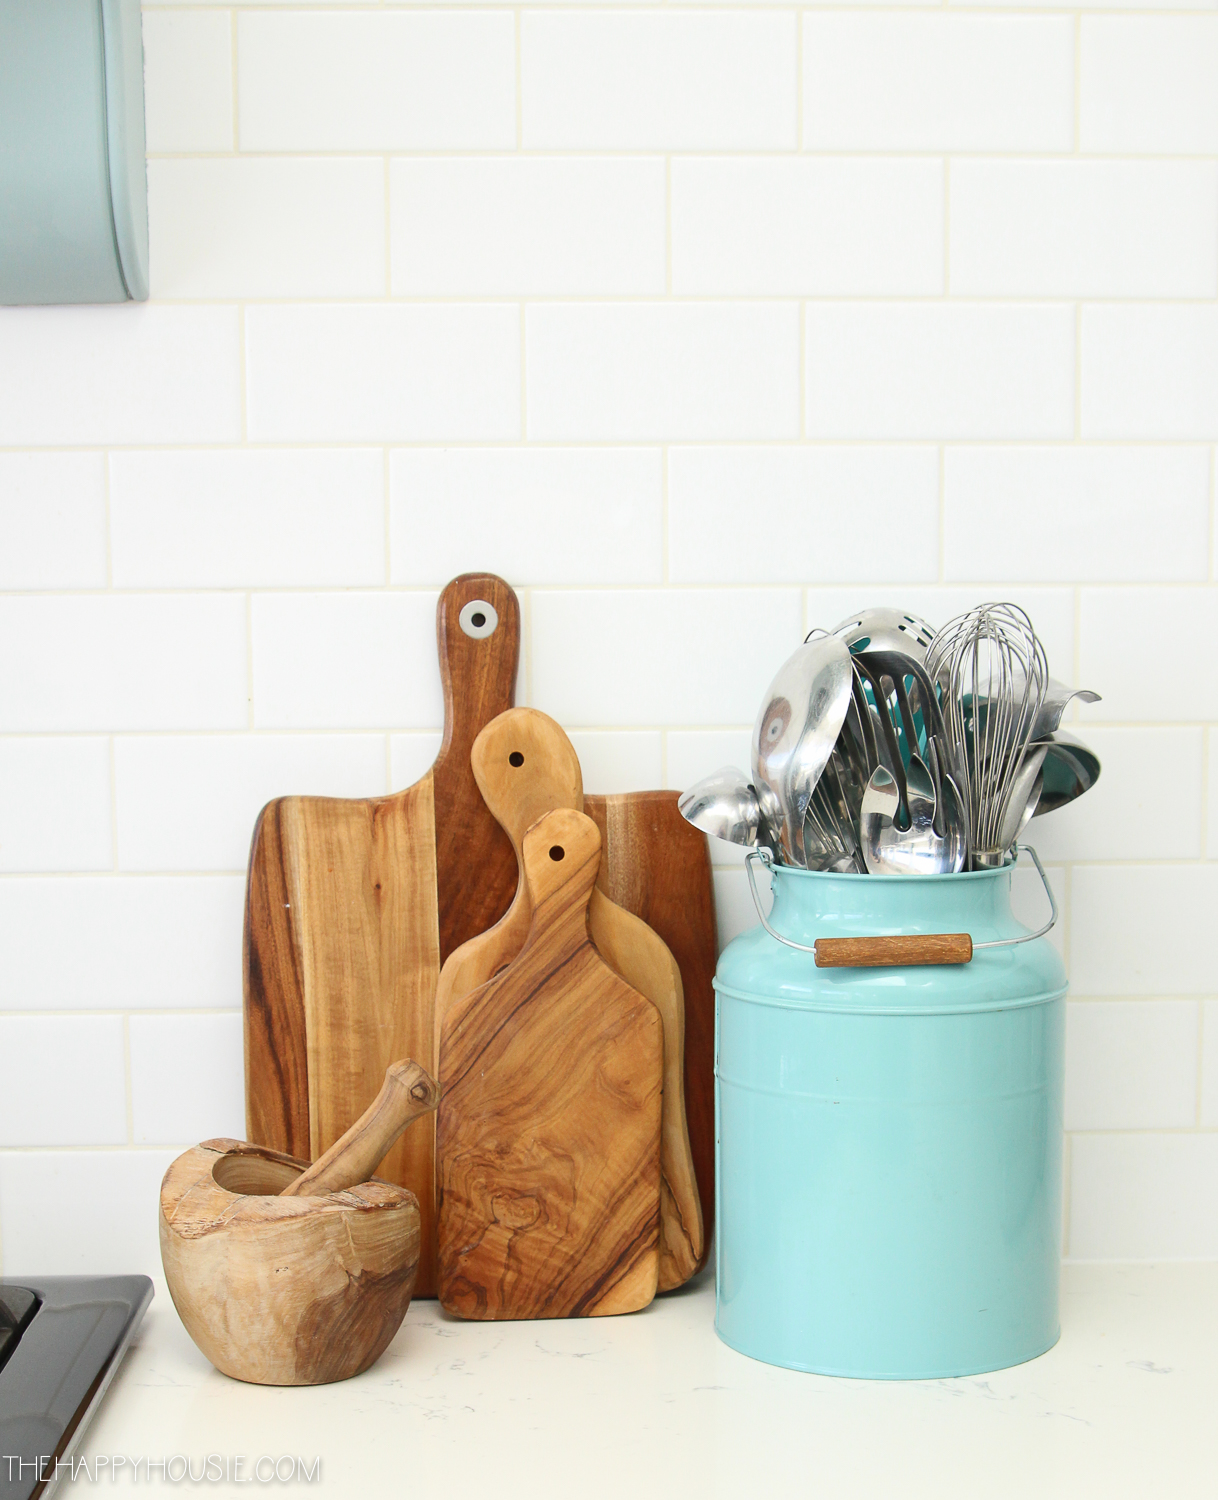 A blue canister filled with kitchen utensils and wooden cutting boards beside it.